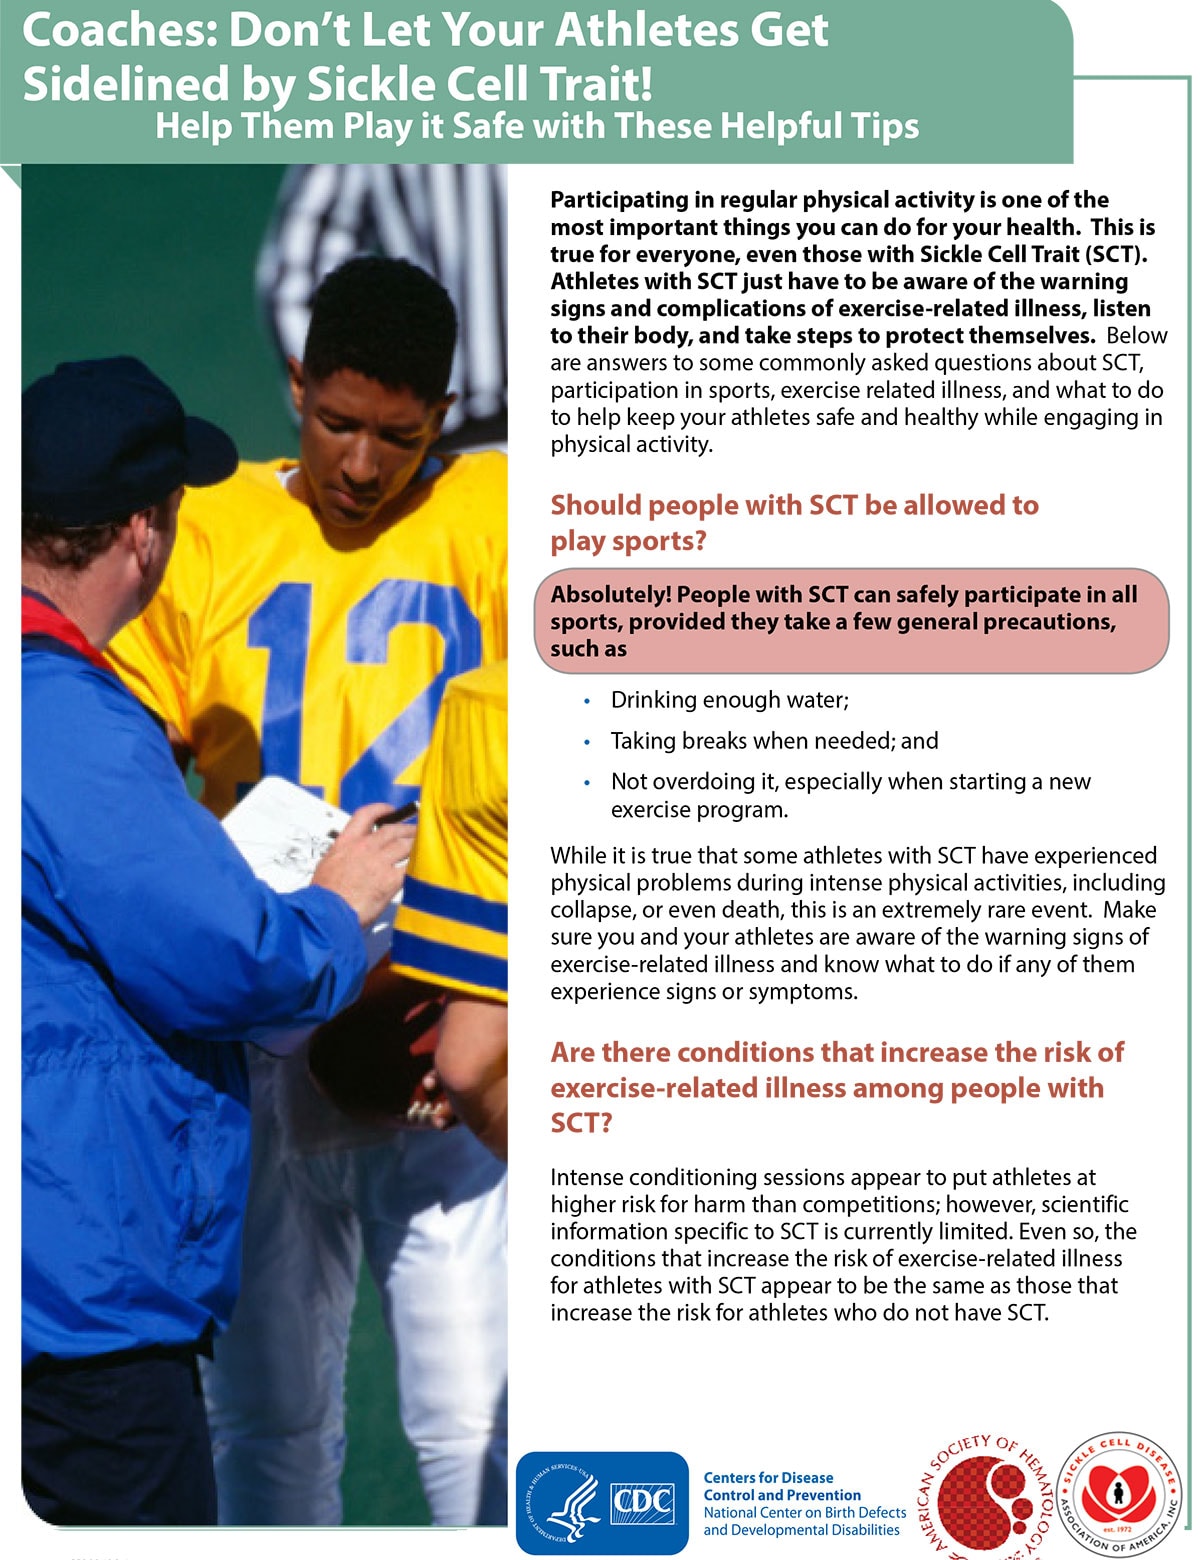 Coaches: Don’t let your athletes get sidelined by sickle cell trait! Help them play it safe with these helpful tips! - factsheet thumbnail